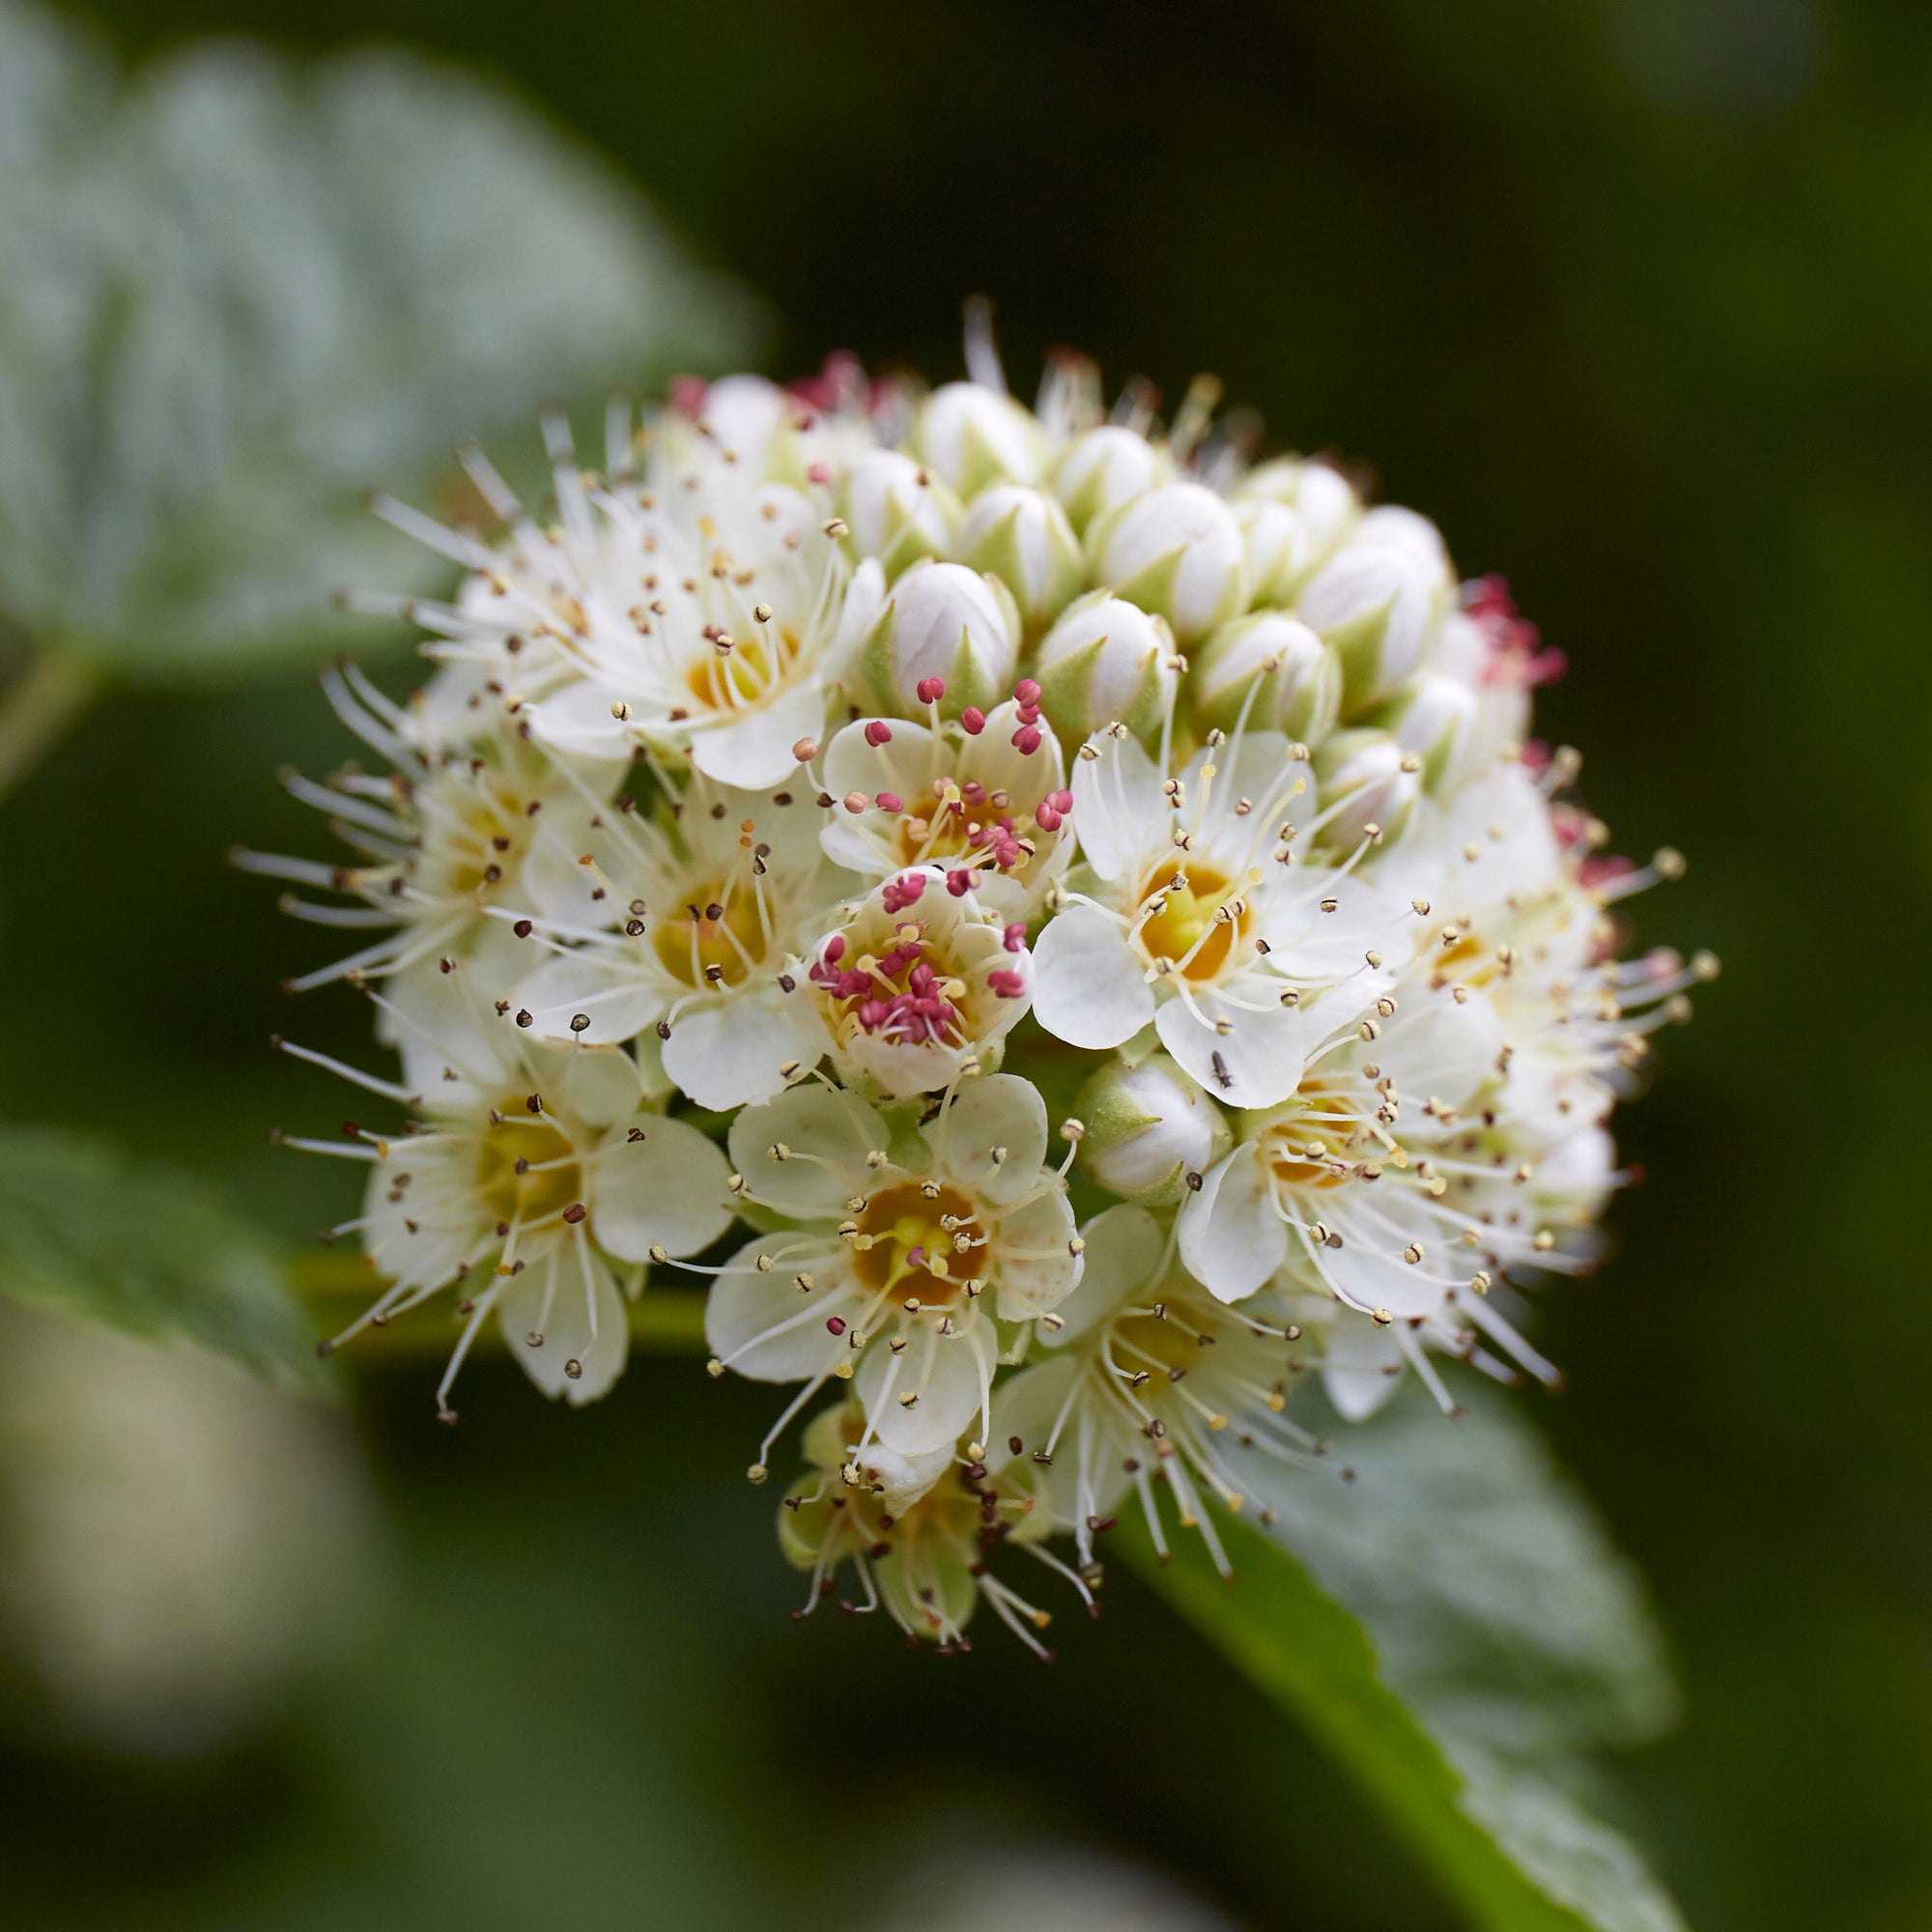 A cluster of very small white flowers with yellow centers and some pink on the stamens.